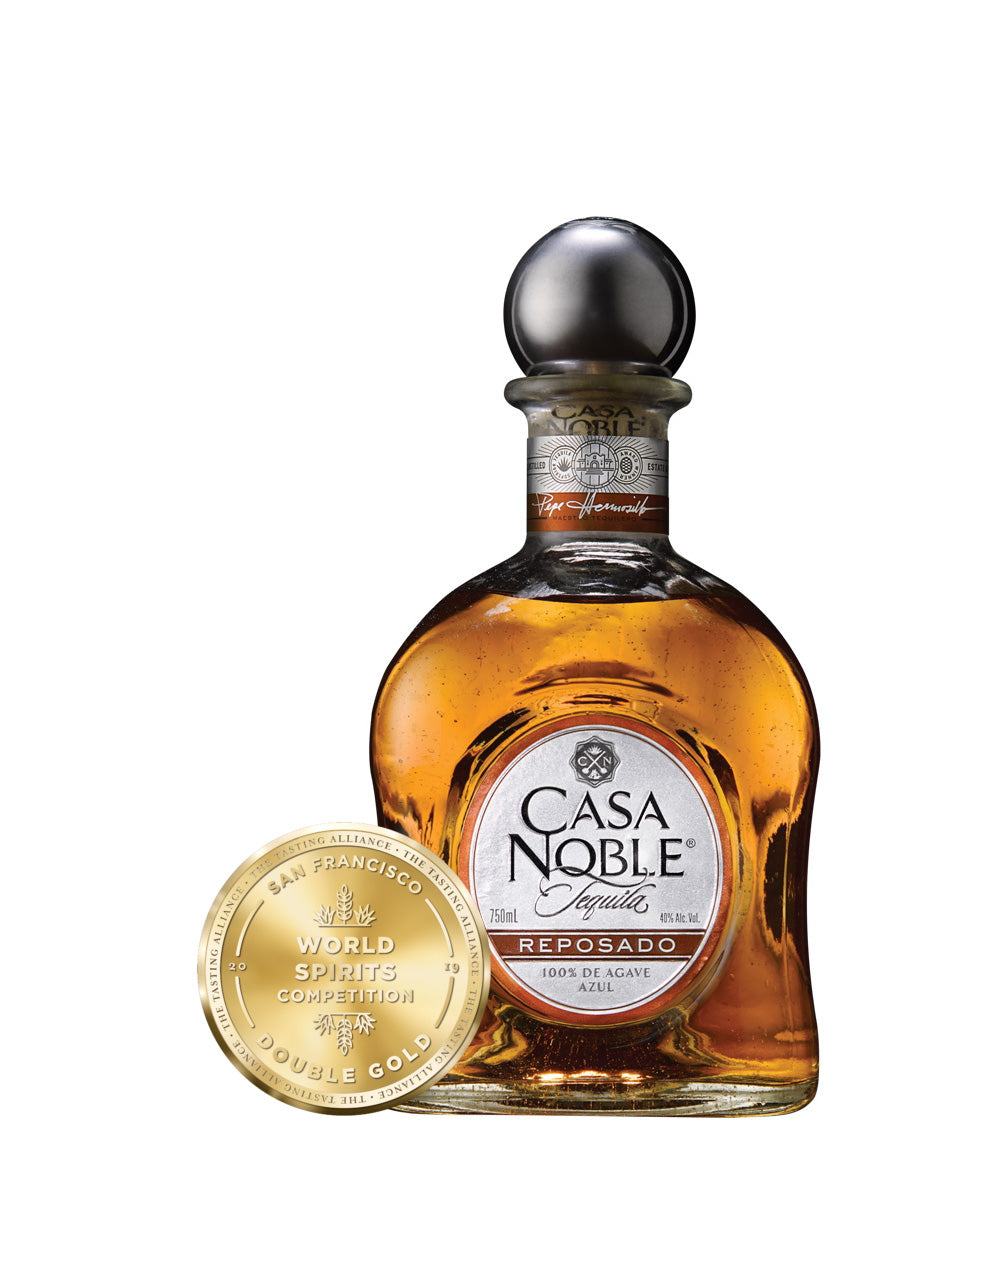 Casa Noble Tequila Reposado bottle and awards